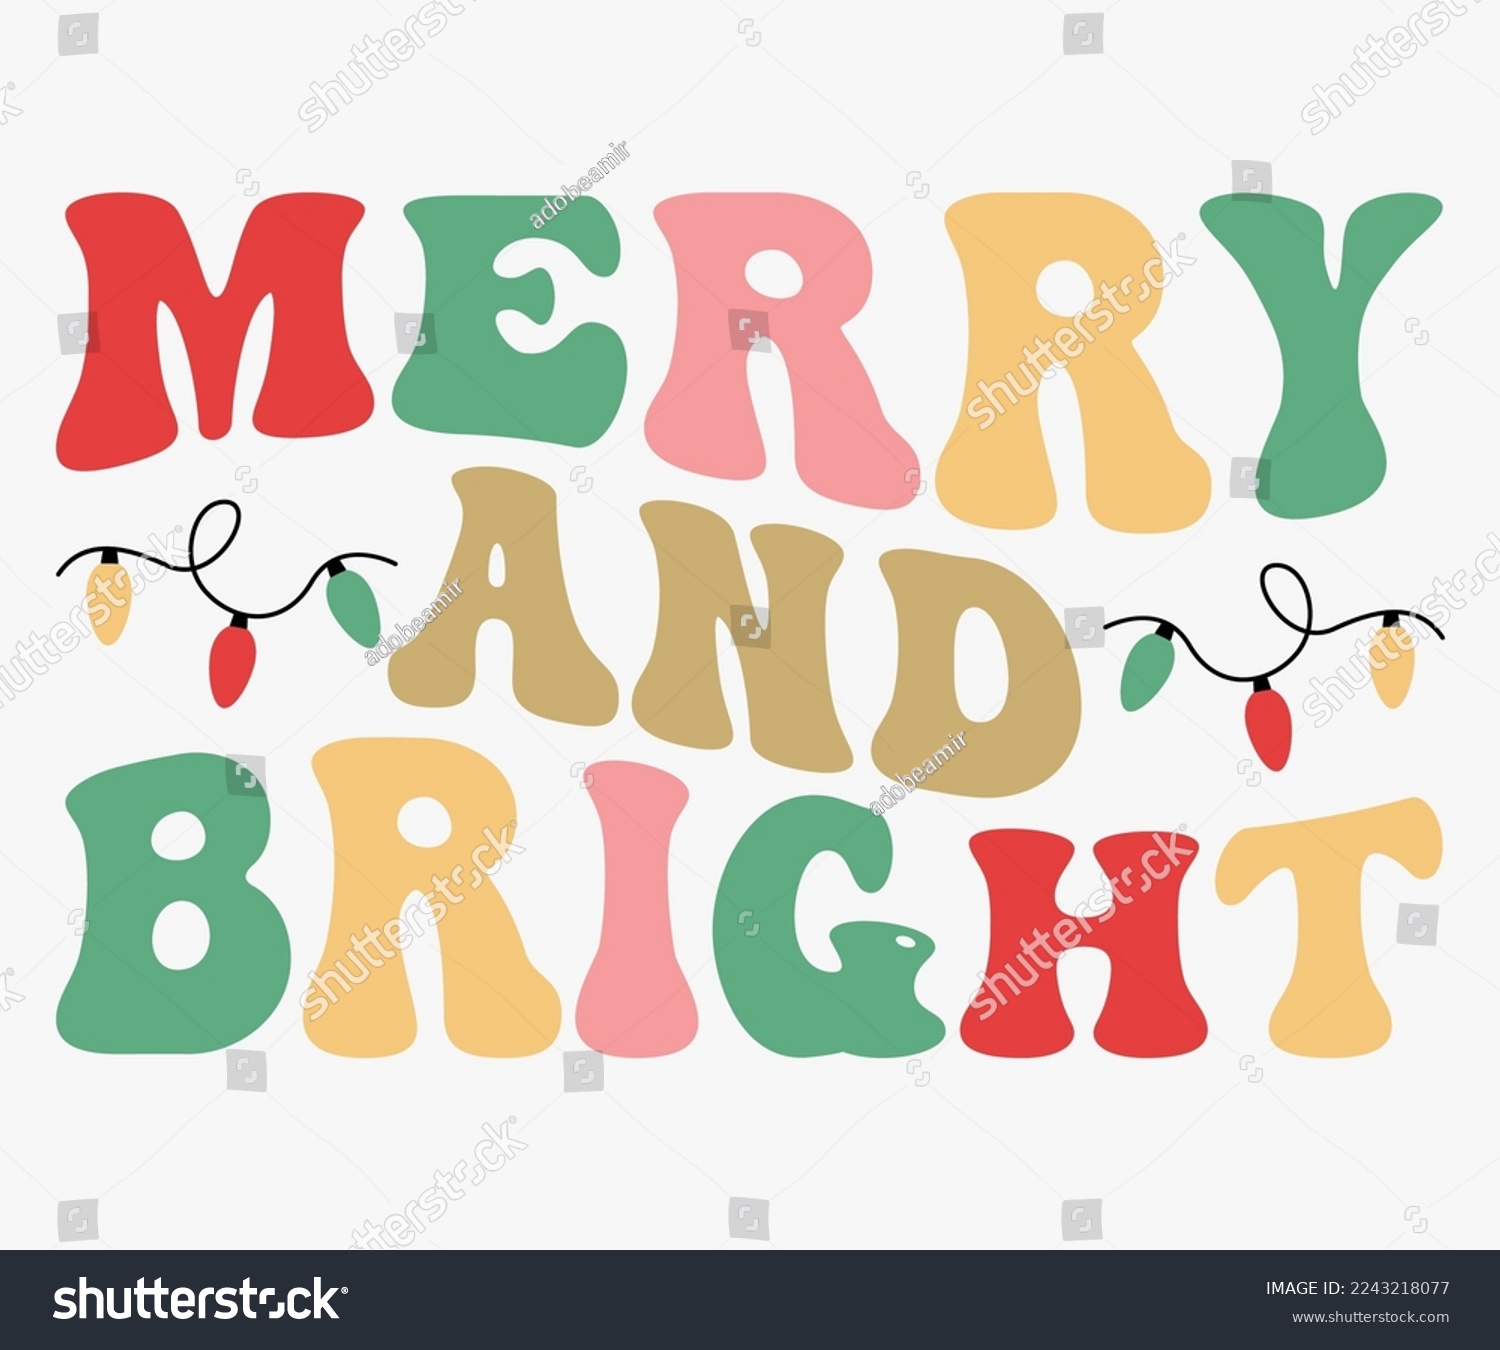 SVG of Merry and Bright Christmas Saying SVG, Retro Christmas T-shirt, Funny Christmas Quotes, Merry Christmas Saying SVG, Holiday Saying SVG, New Year Quotes, Winter Quotes SVG, Cut File for Cricut svg